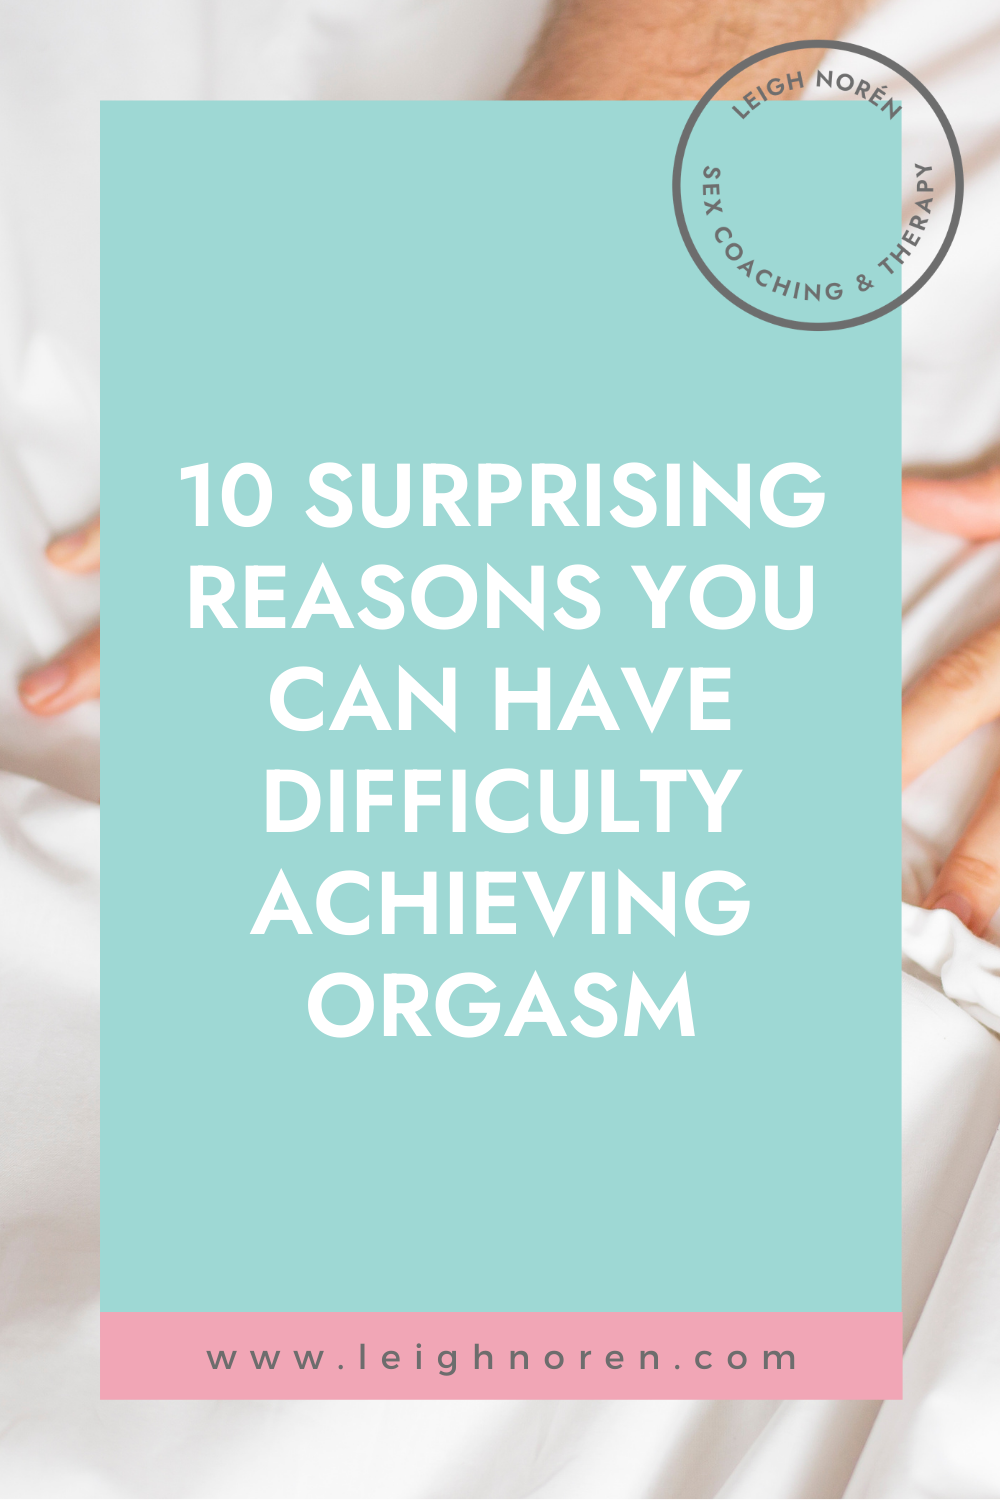 Facts About Delayed Orgasm: The Sexual Technique That's Better Than Sex Uncovered